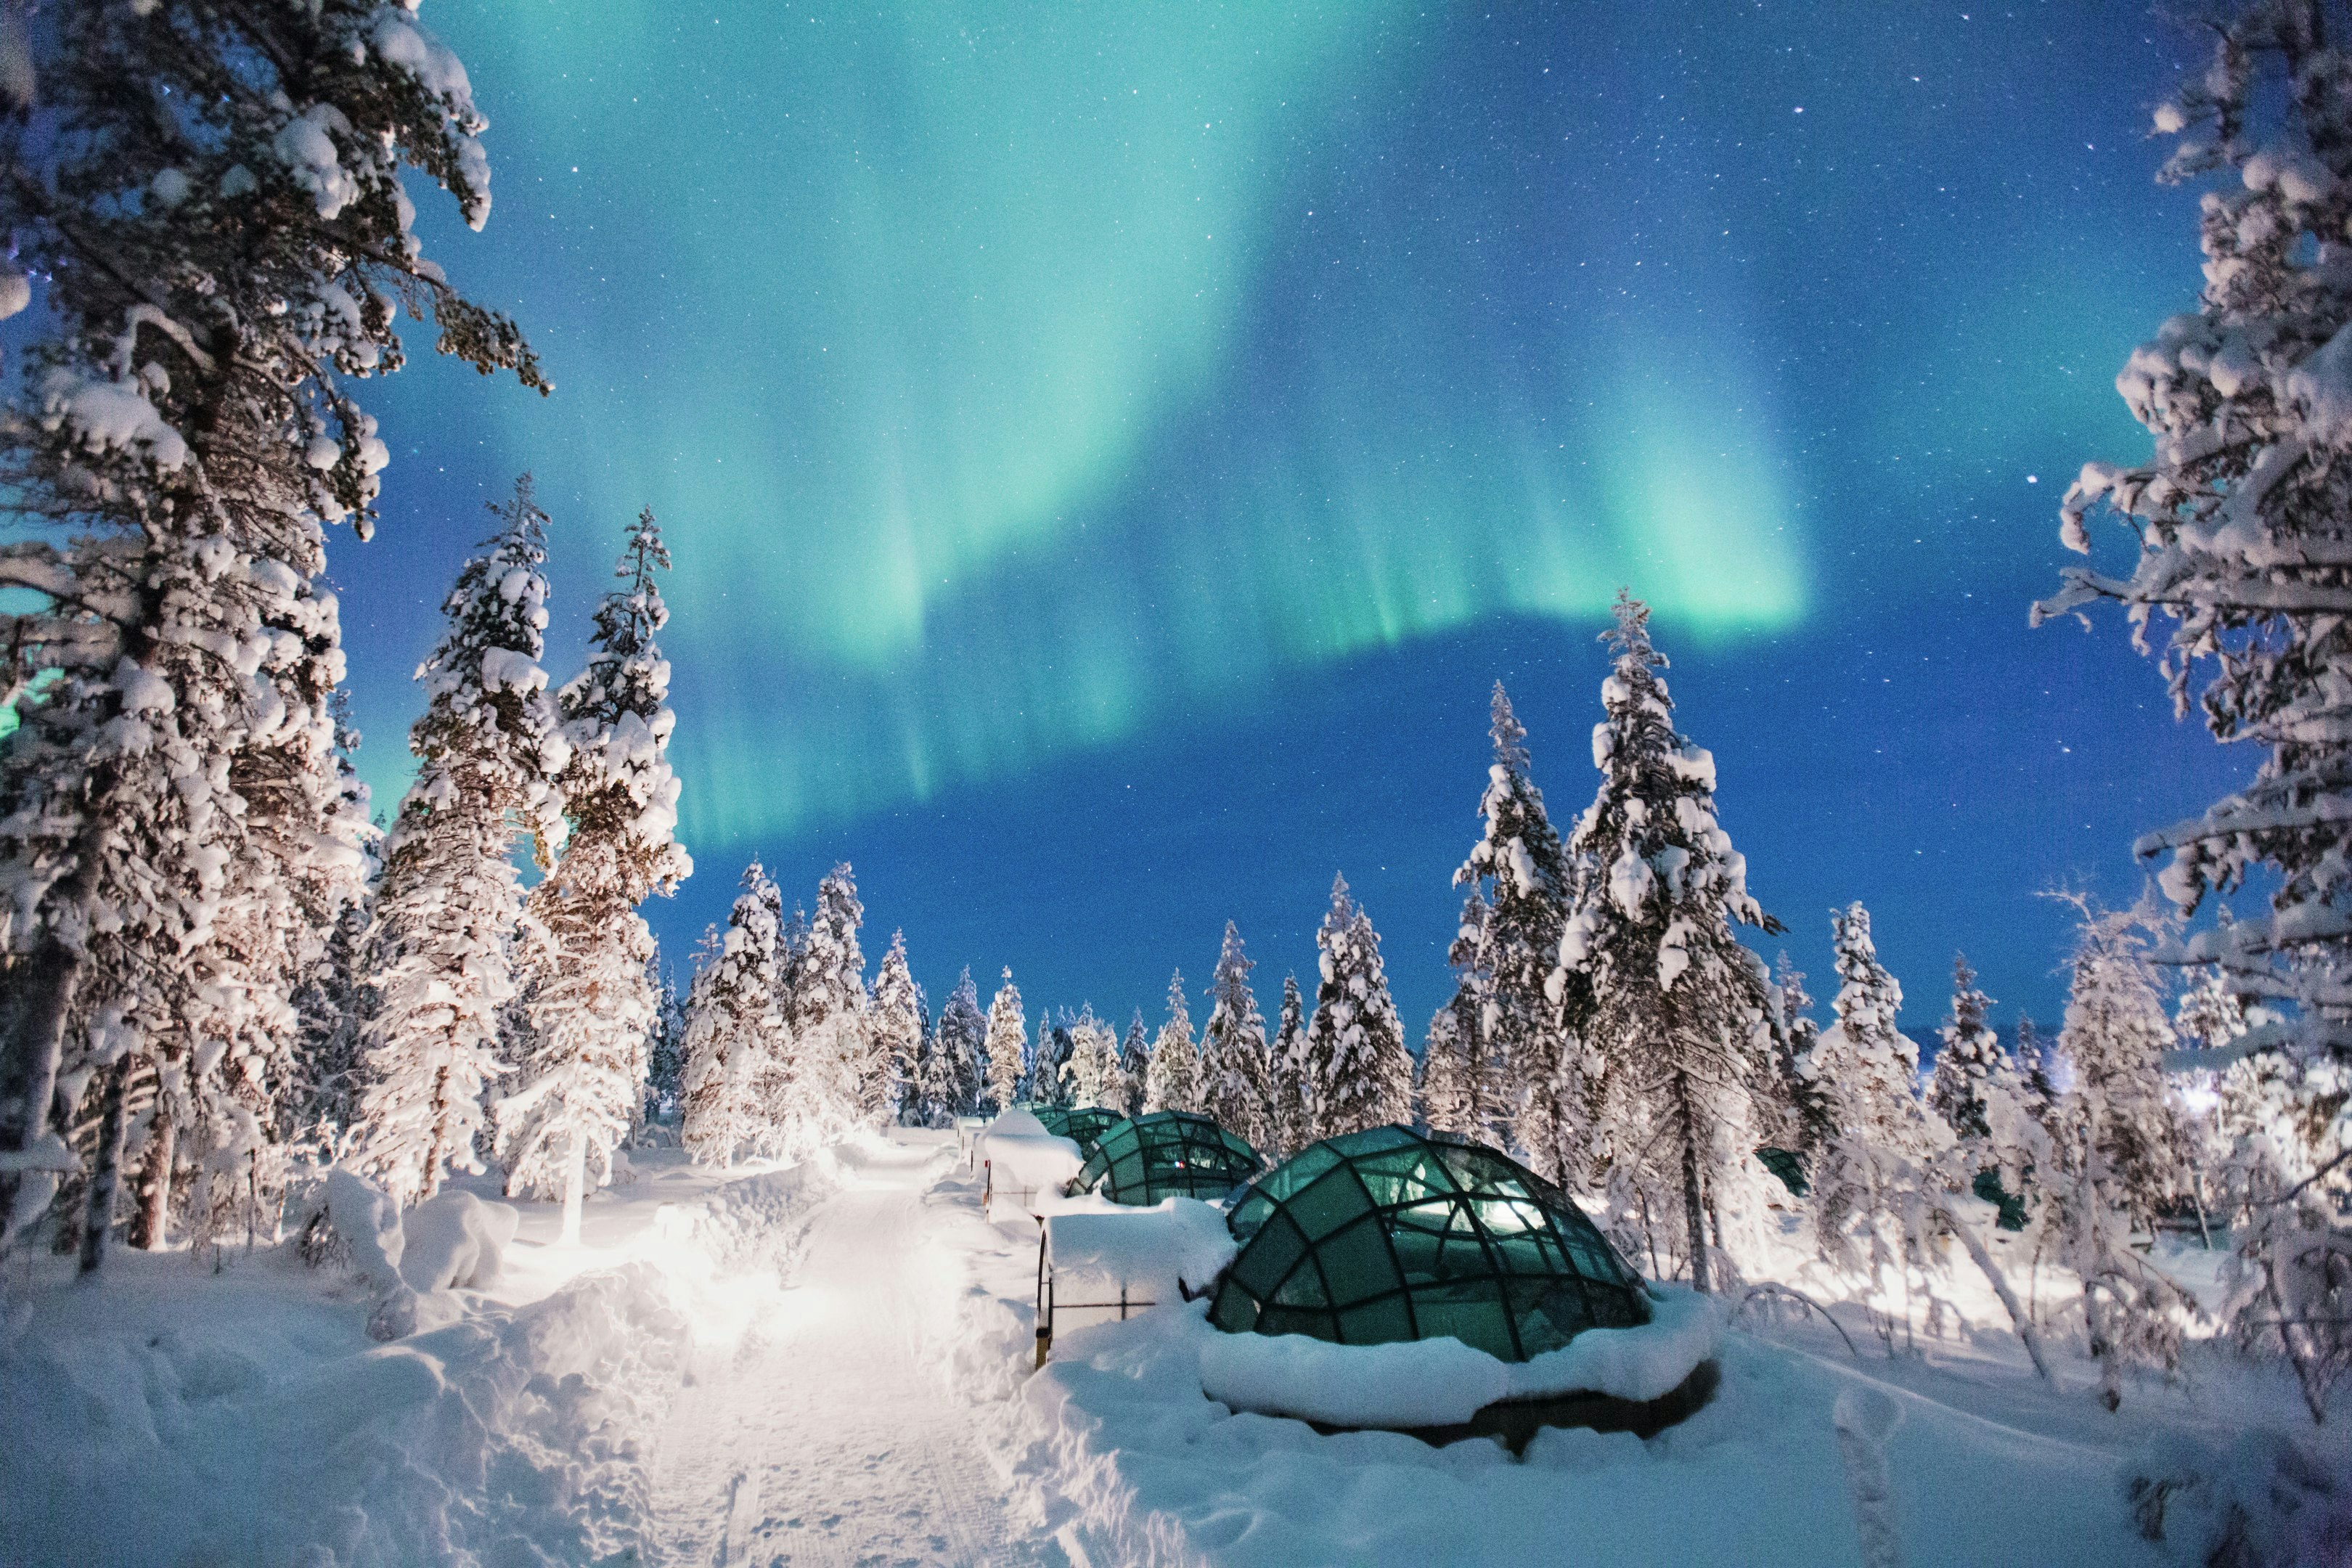 A row of igloos made of glass are lined up in deep snow amid tall pine trees. Overhead, the wispy green shapes of the Northern Lights streak across the starry night sky.